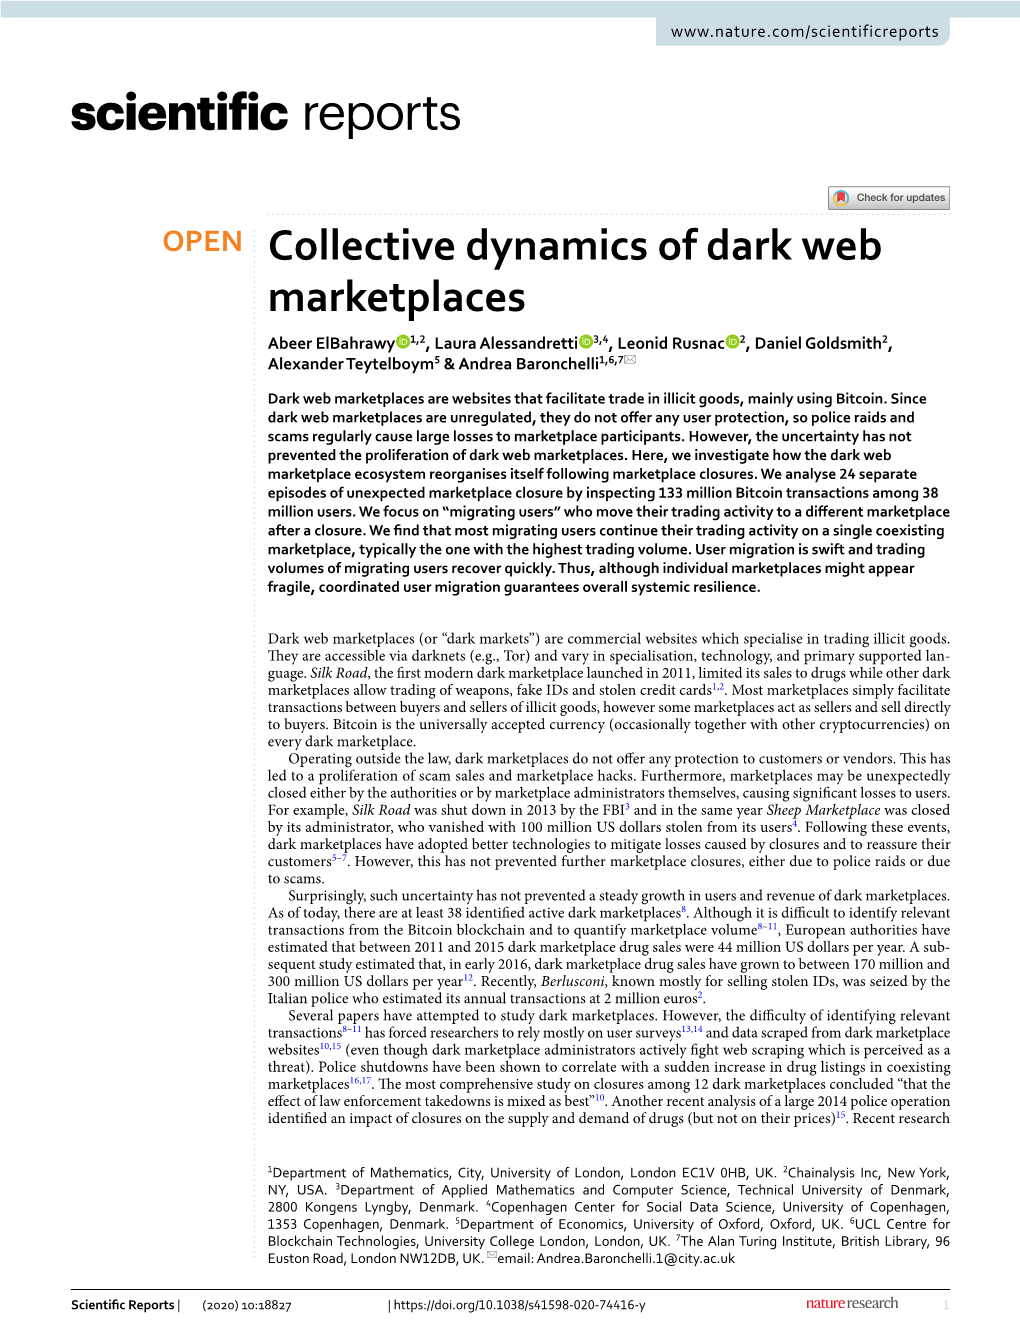 Collective Dynamics of Dark Web Marketplaces